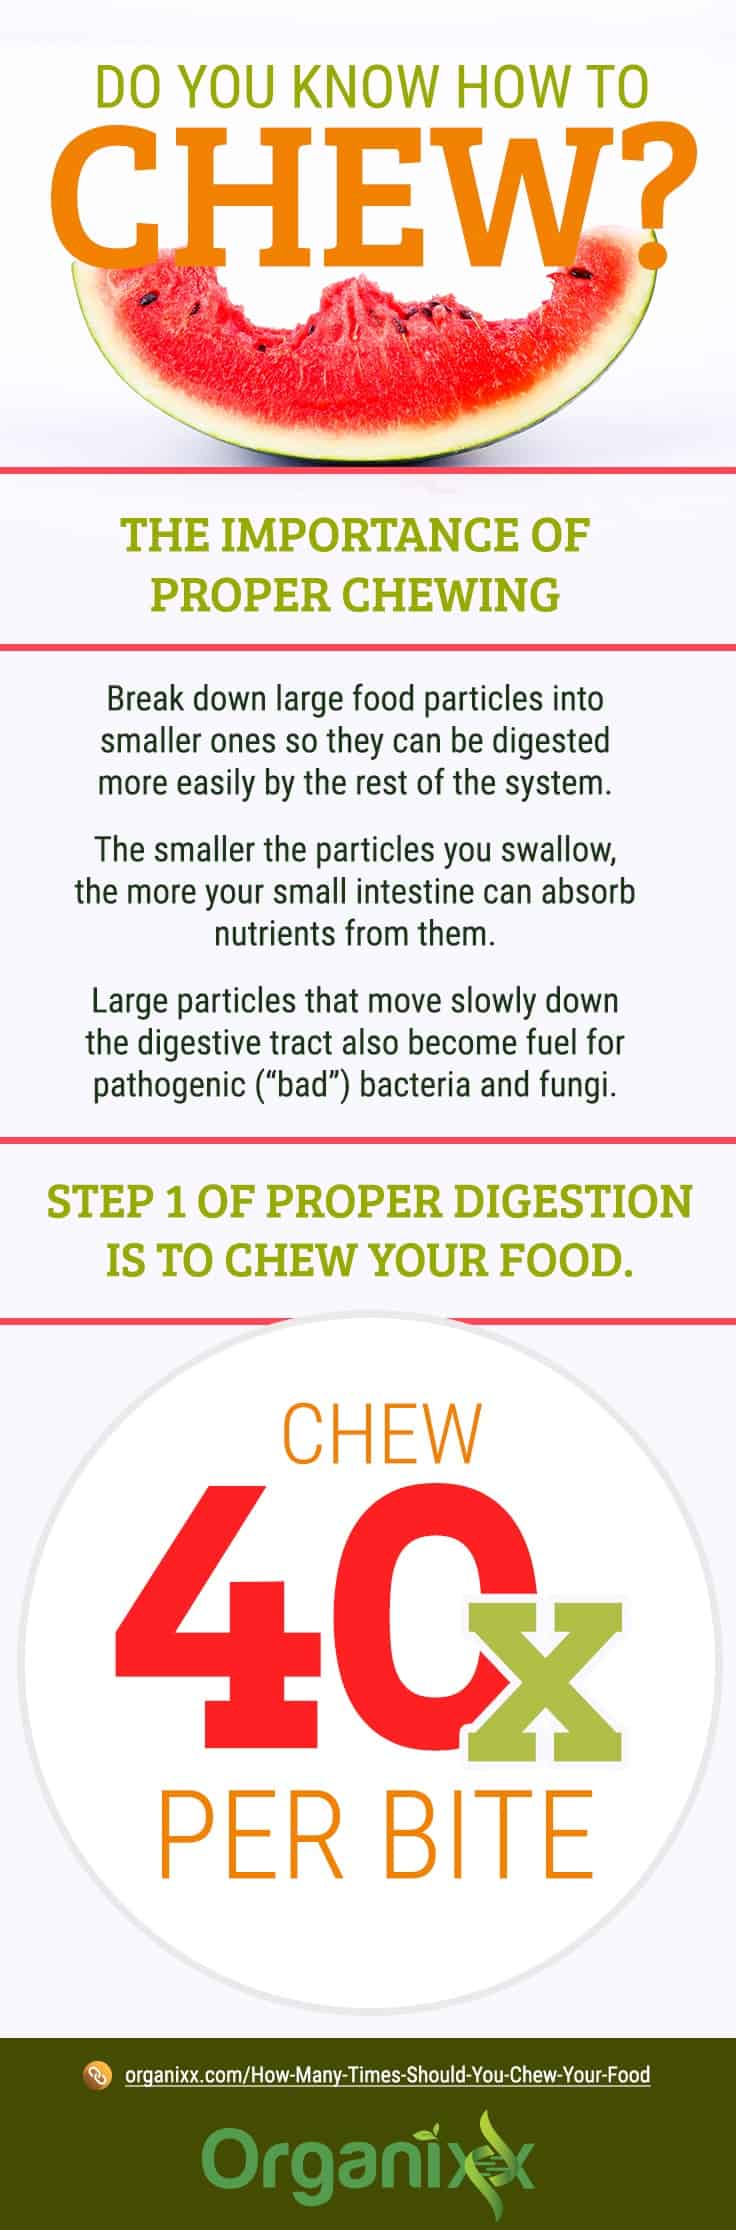 Do You Know How To Chew?